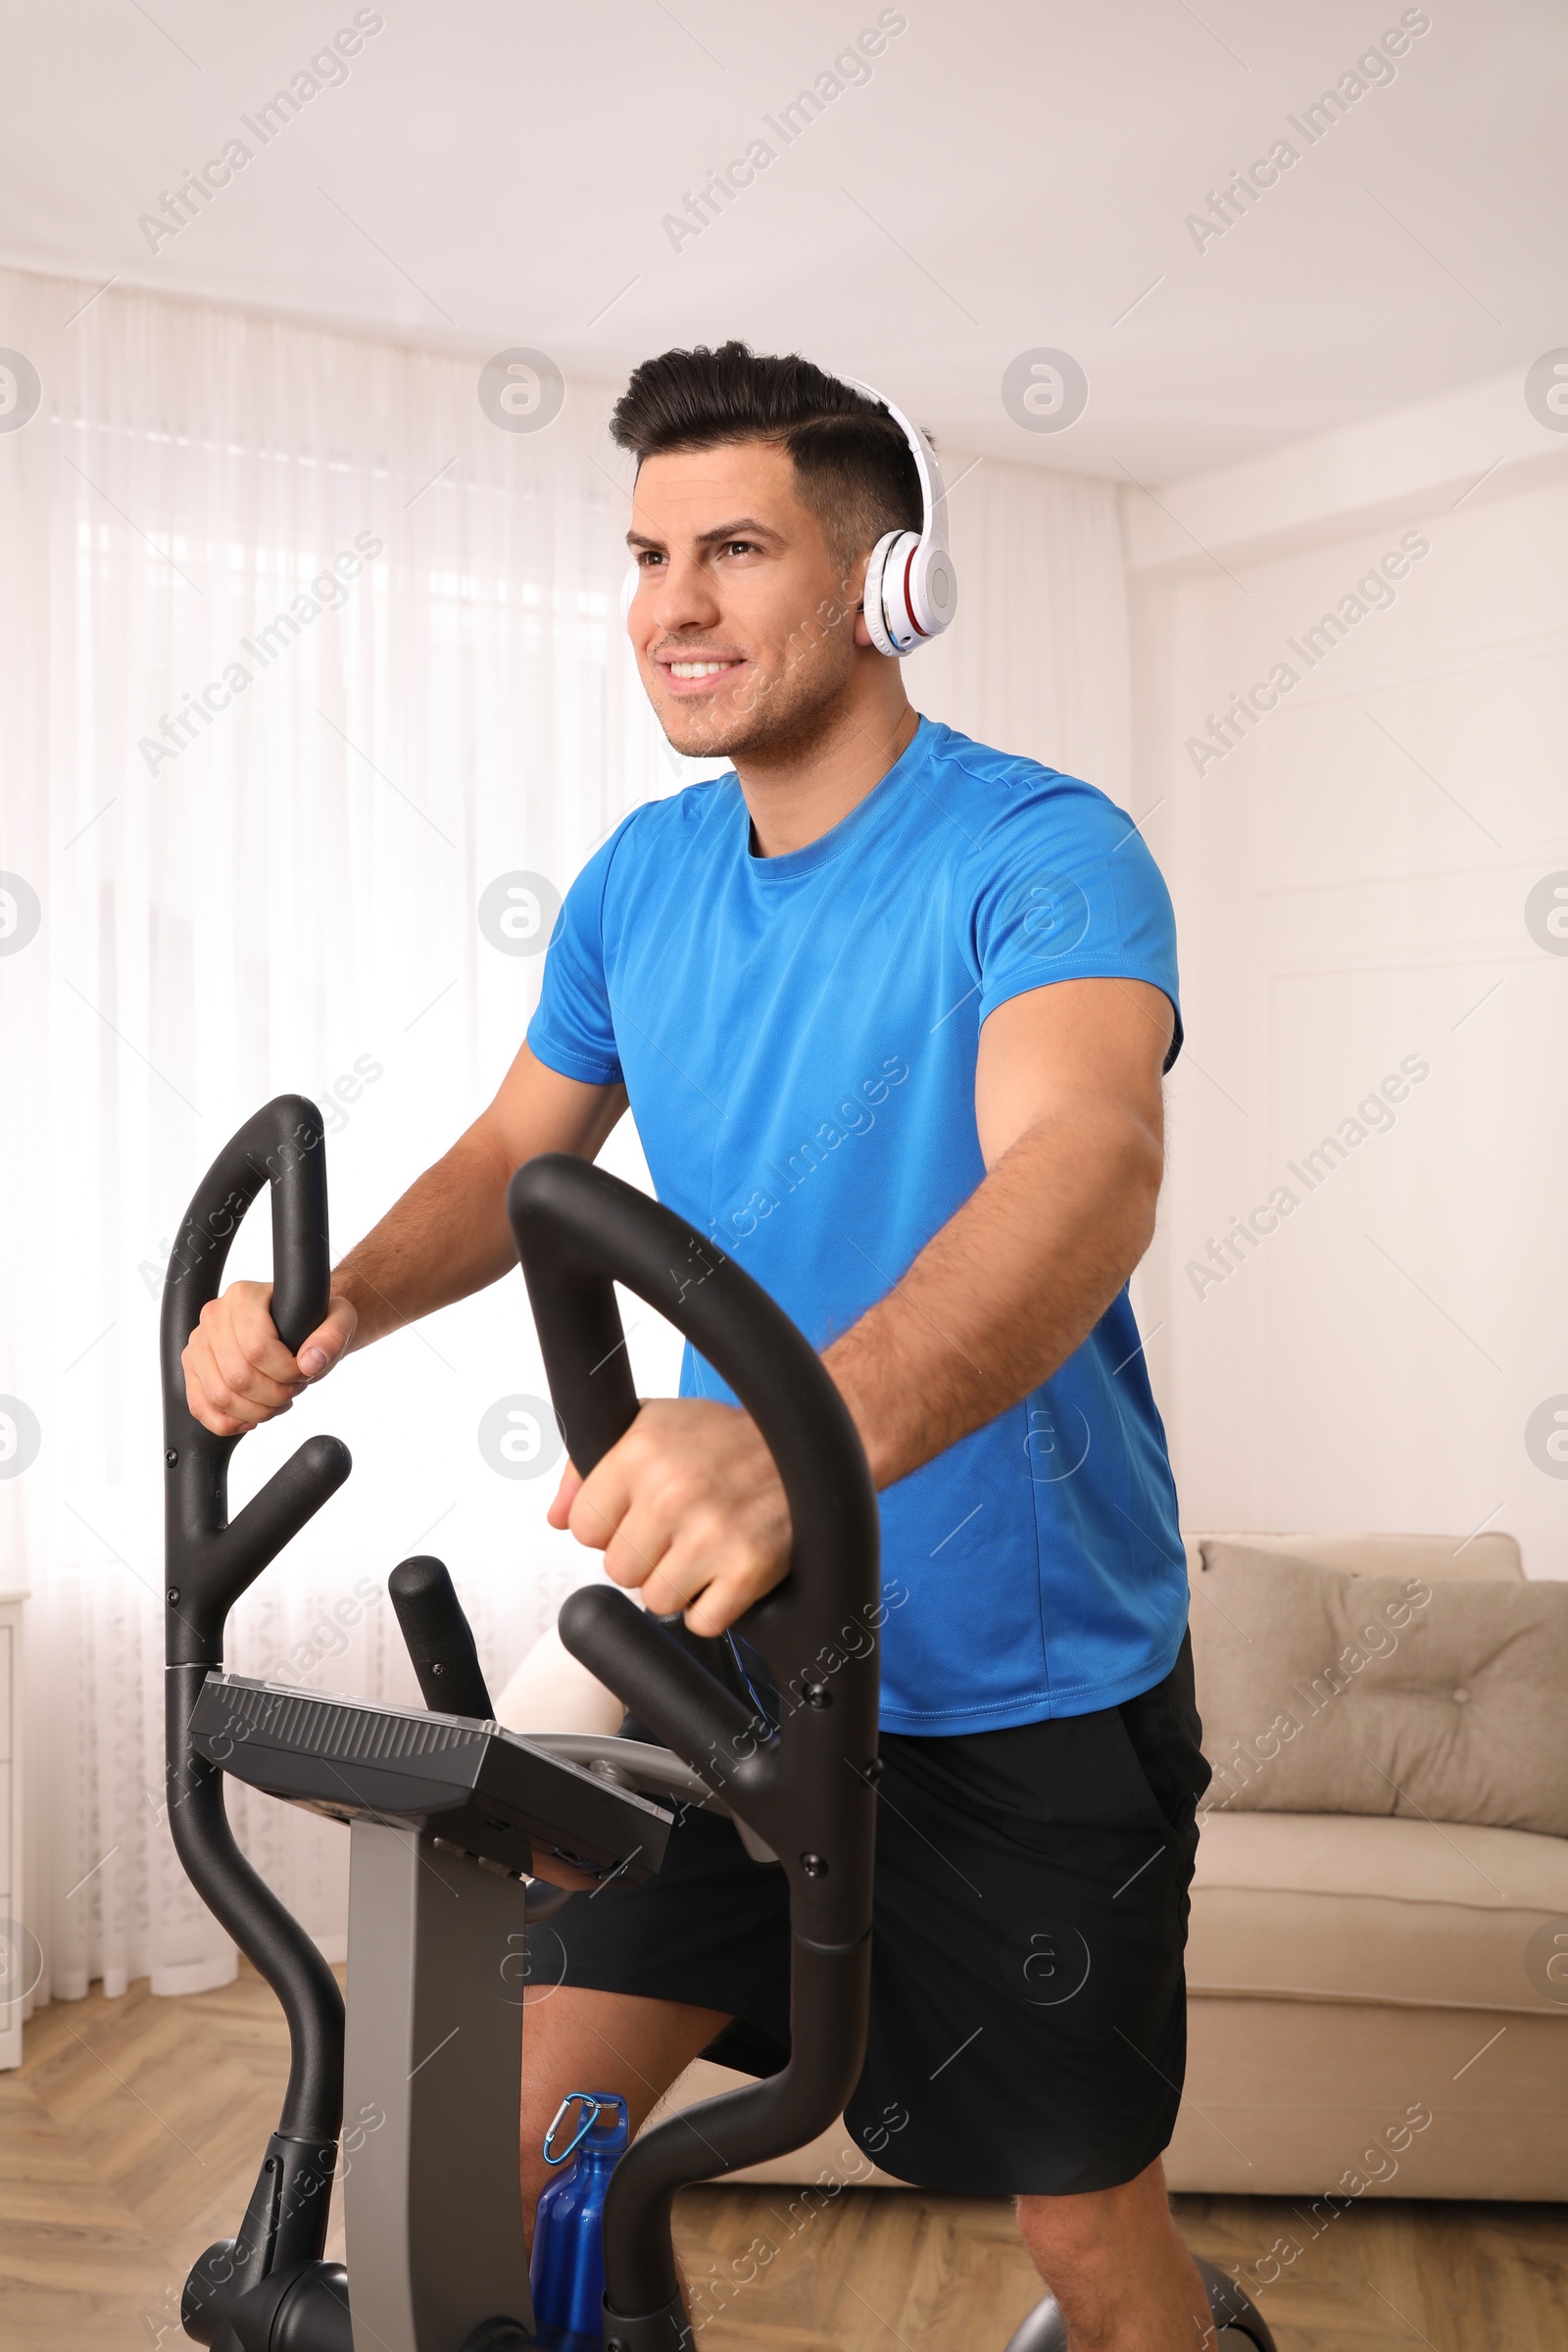 Photo of Man with headphones using modern elliptical machine at home